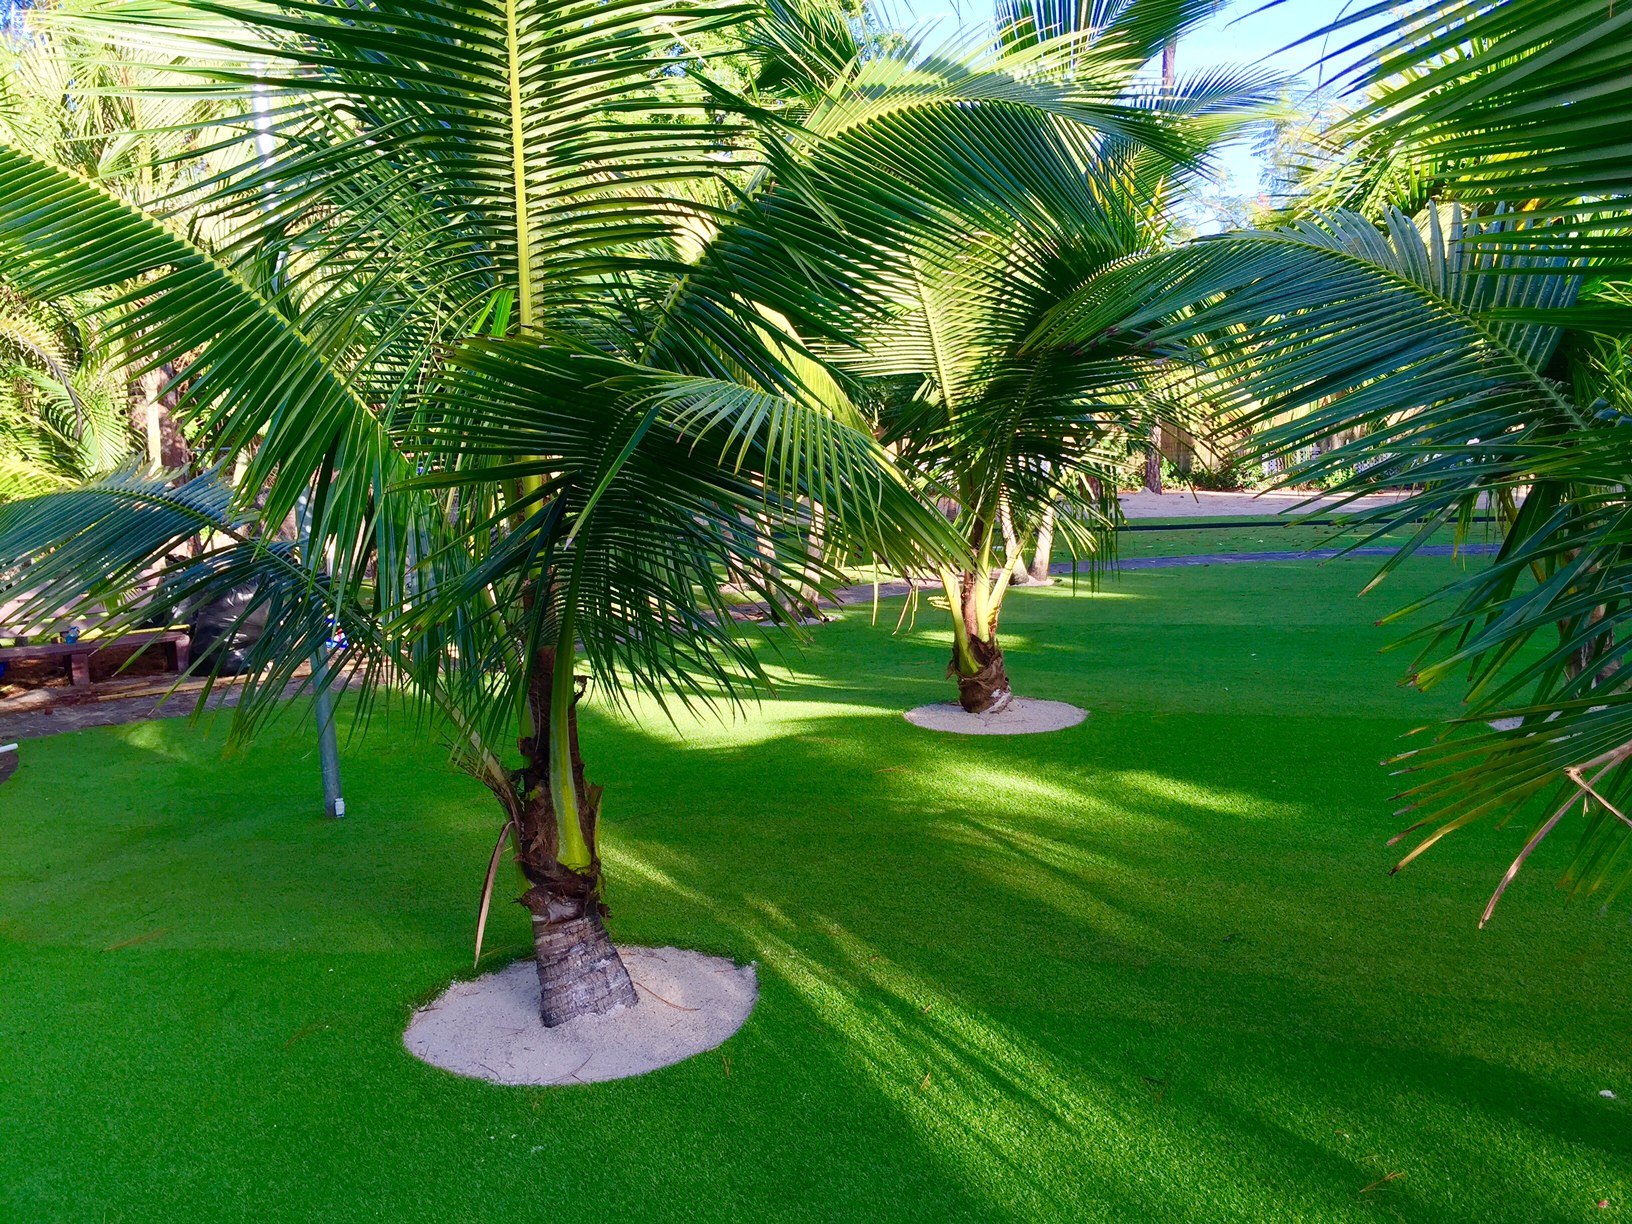 Synthetic lawn installation with palm trees backyard Florida.